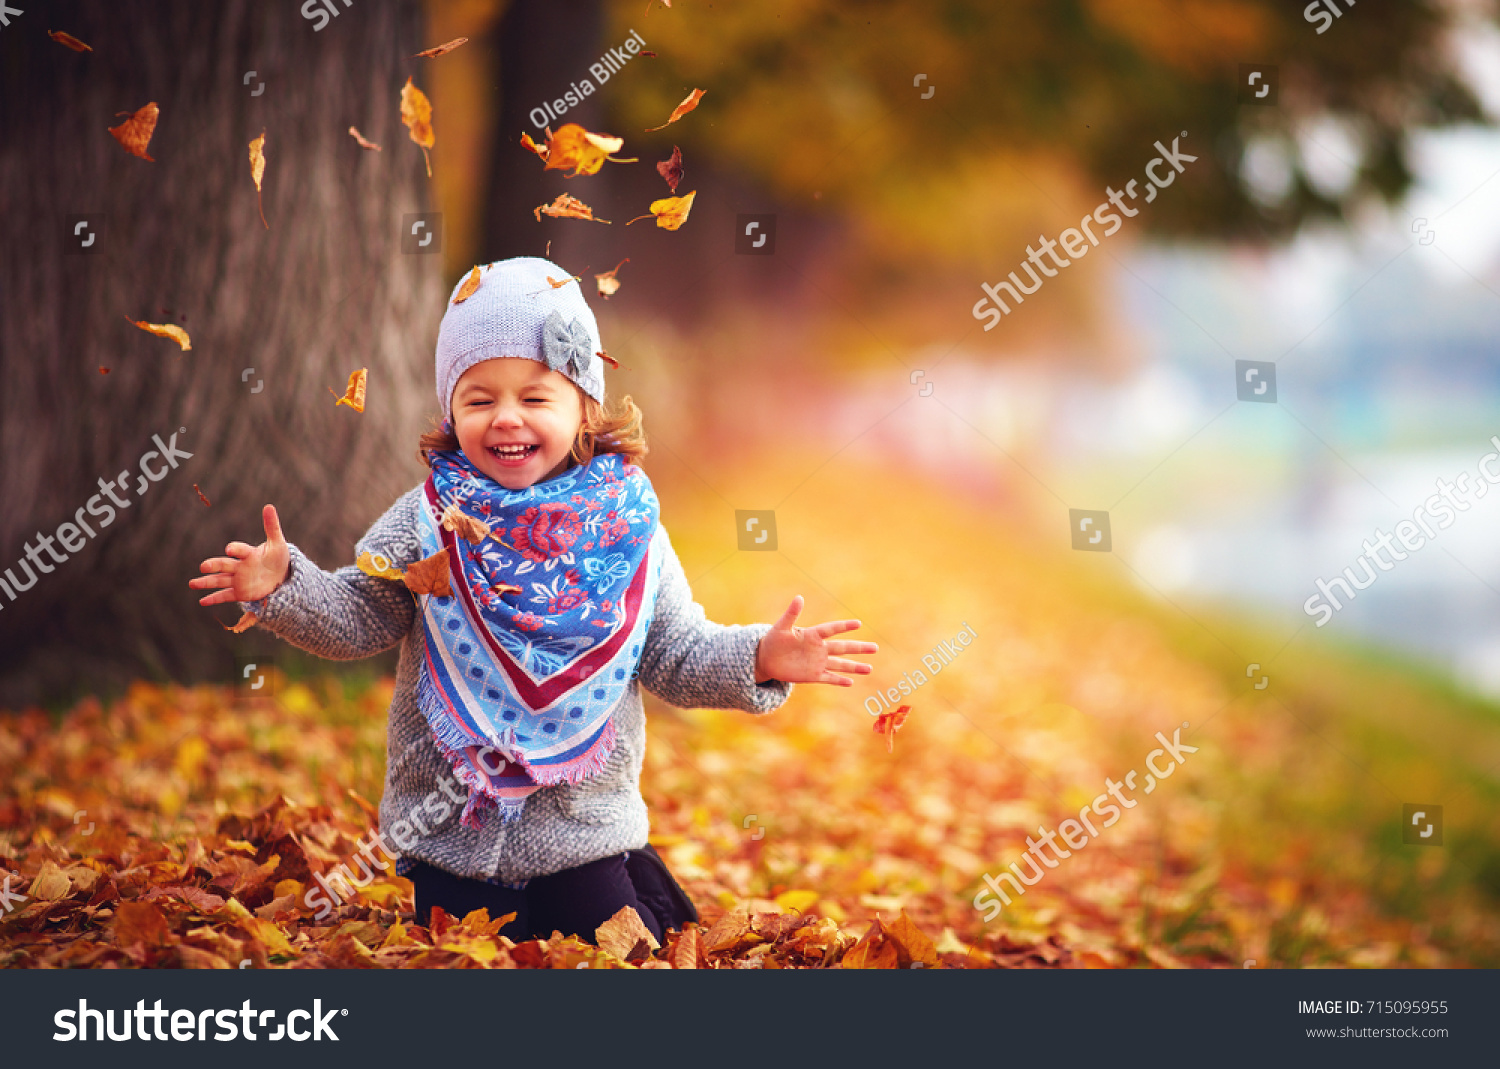 adorable happy girl playing with fallen leaves in autumn park #715095955